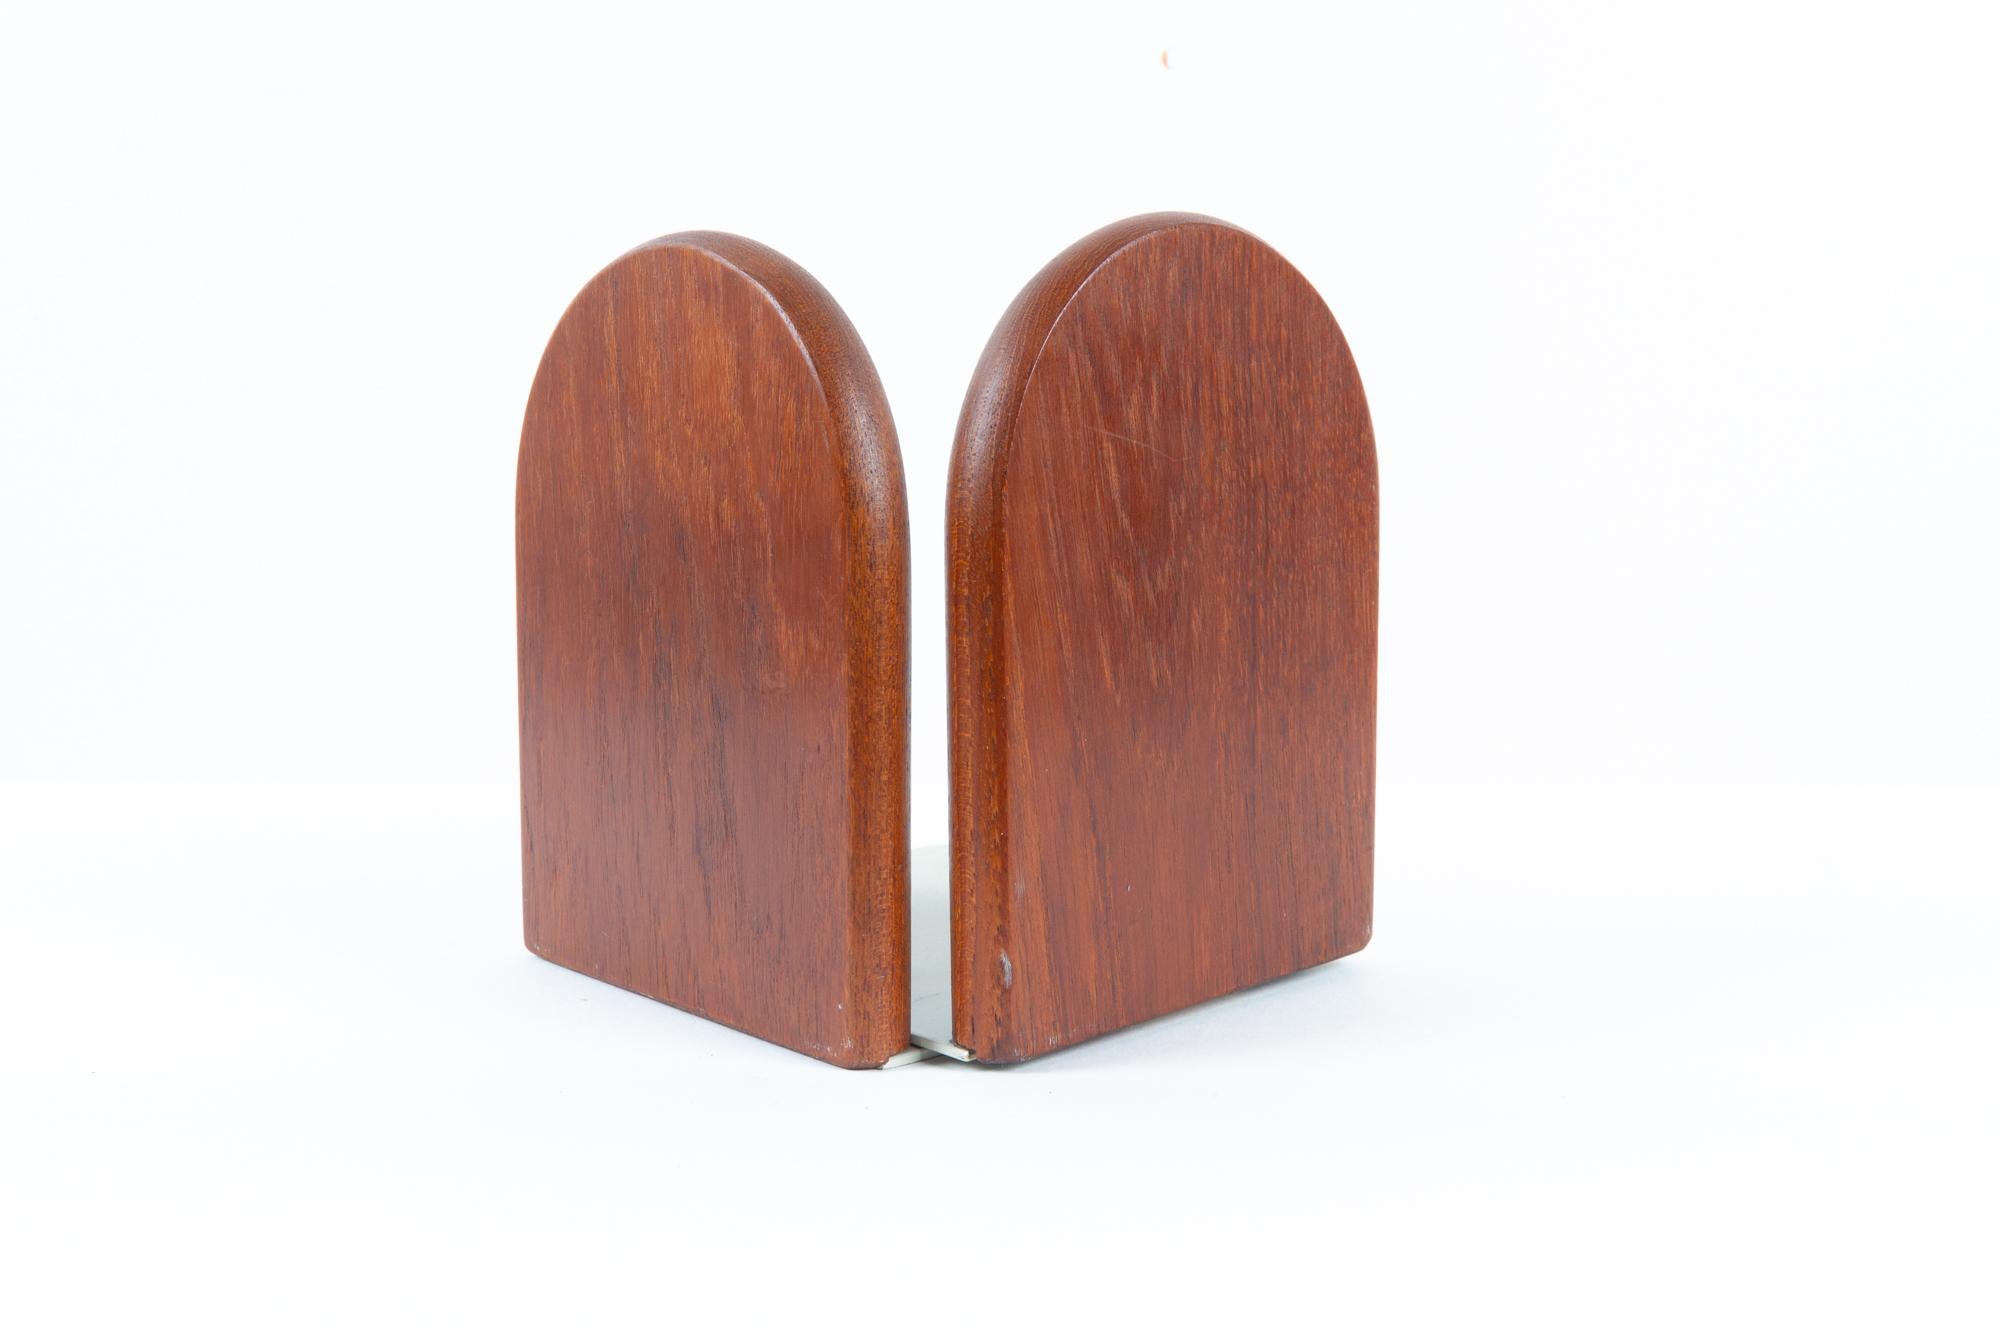 Vintage Danish Teak Bookends 1960s, Set of 2 In Good Condition For Sale In Asaa, DK